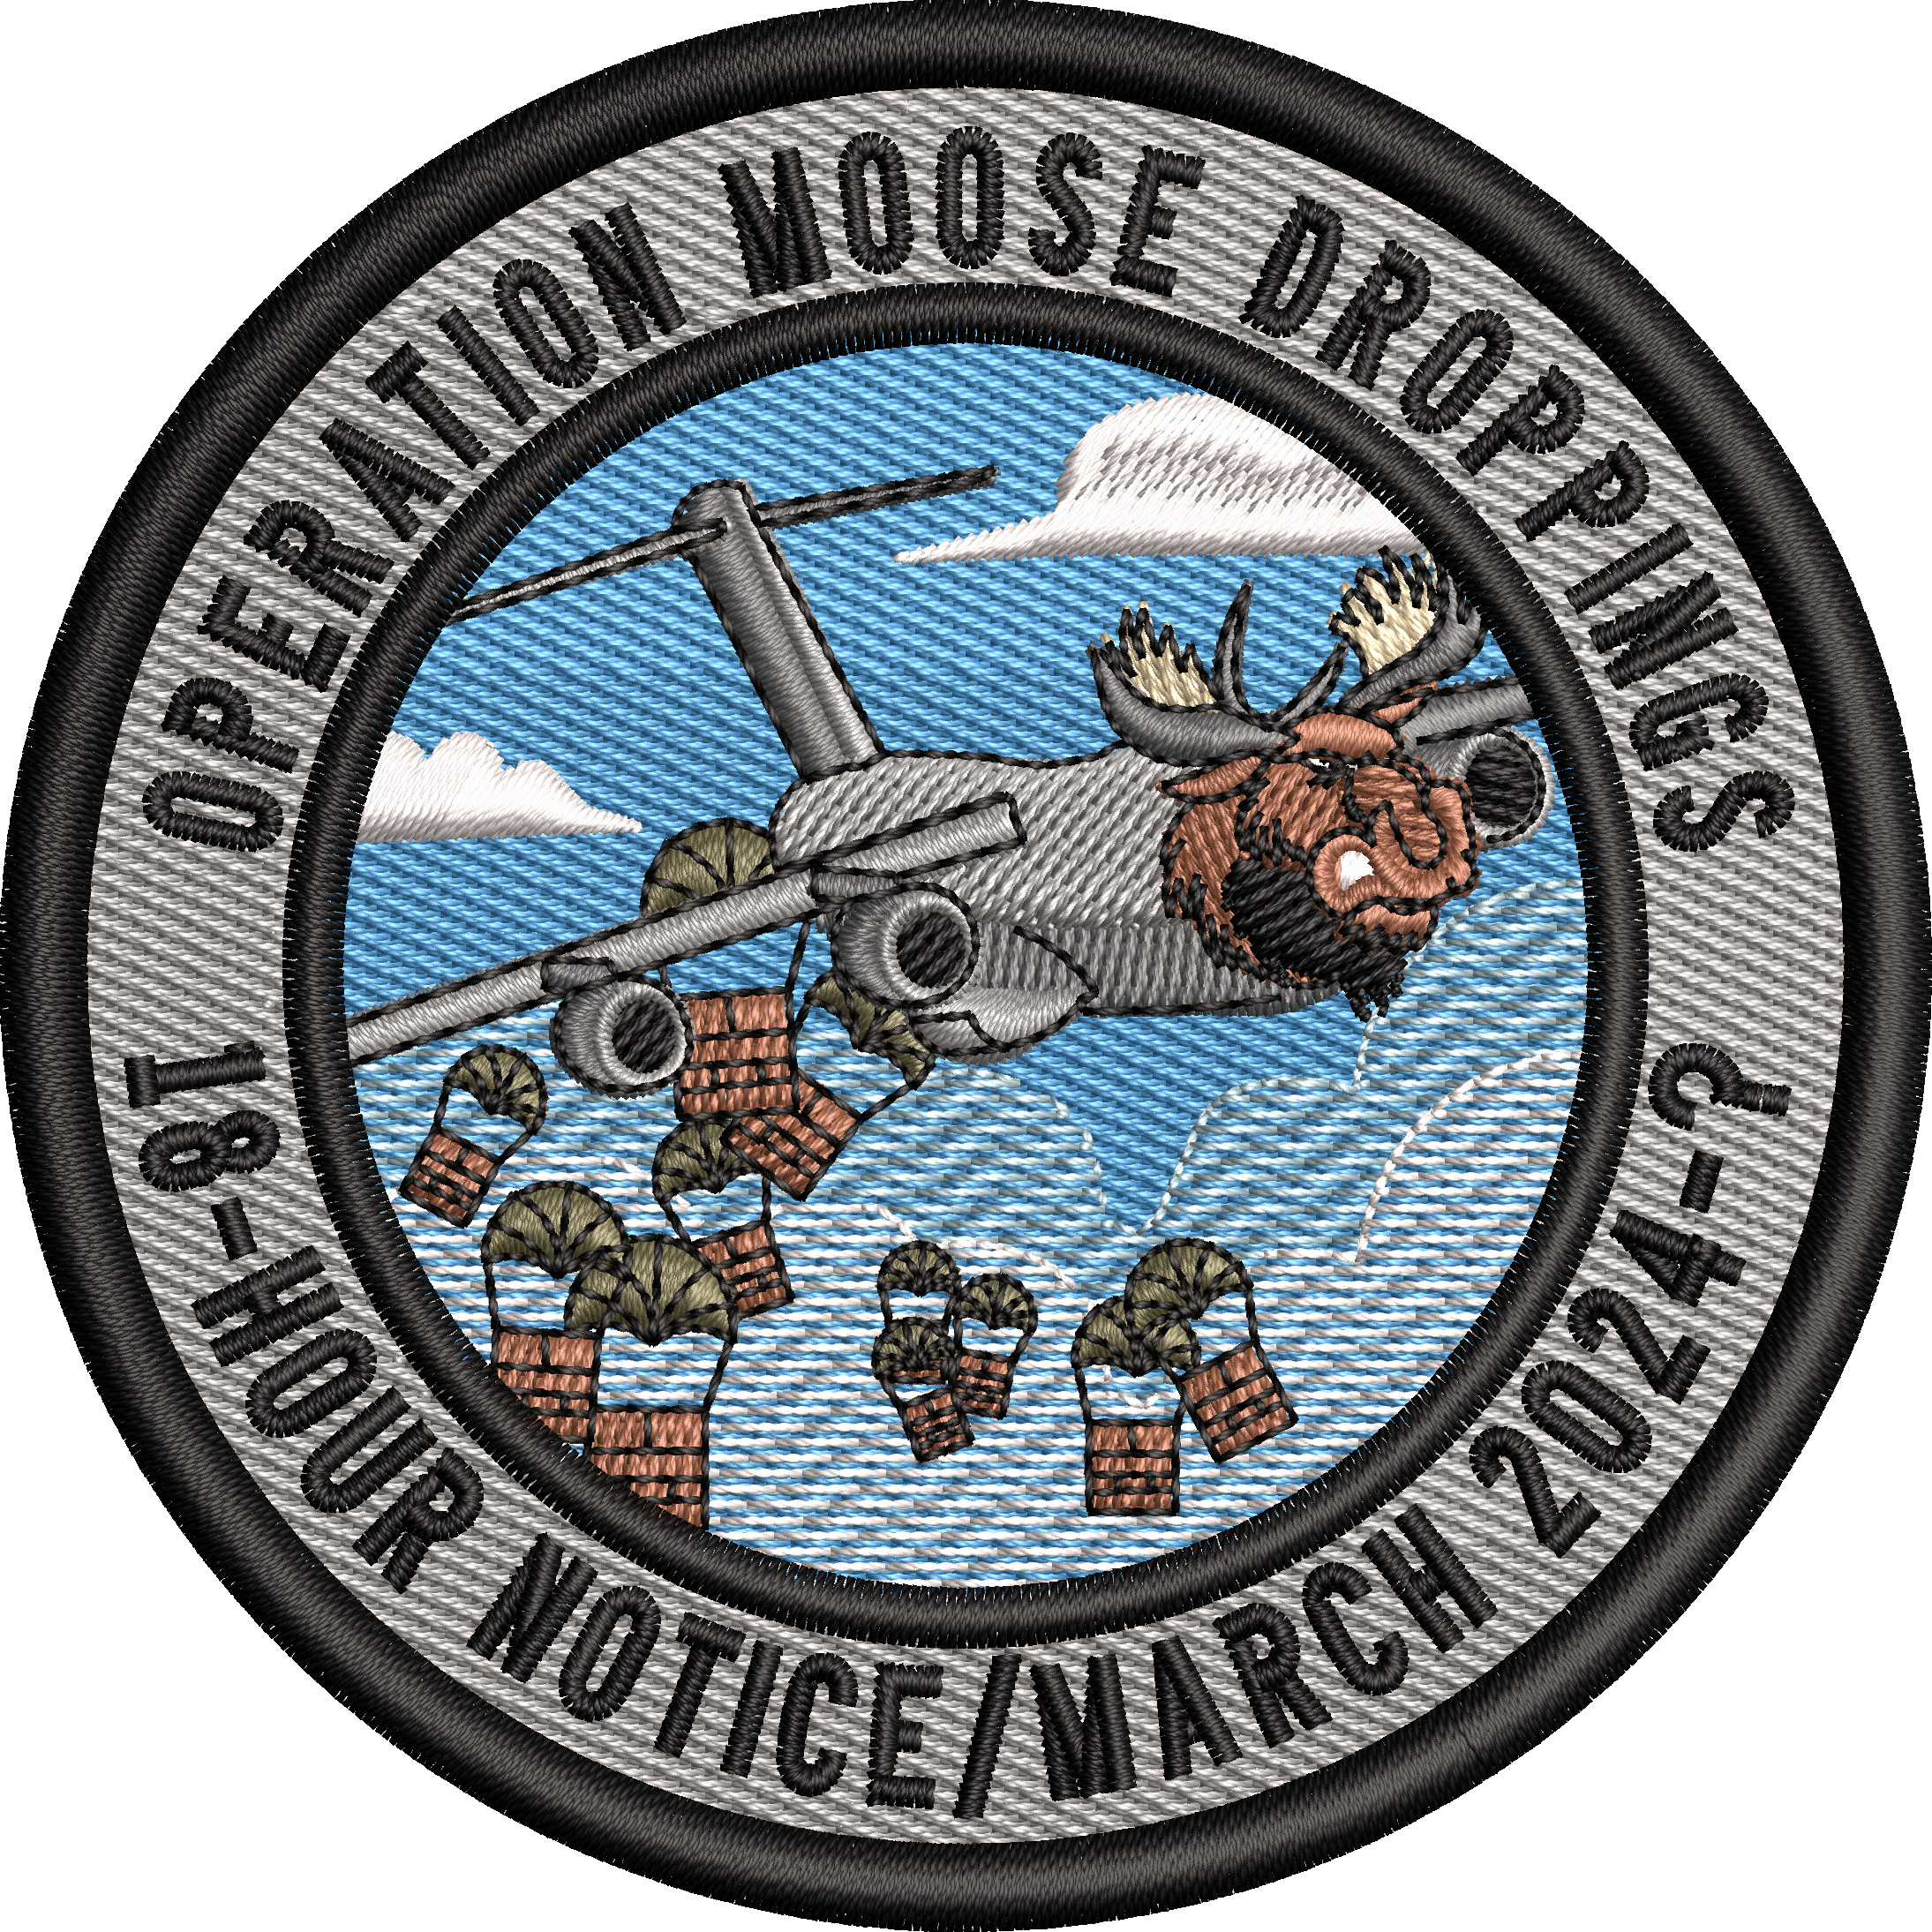 Operation Moose Droppings